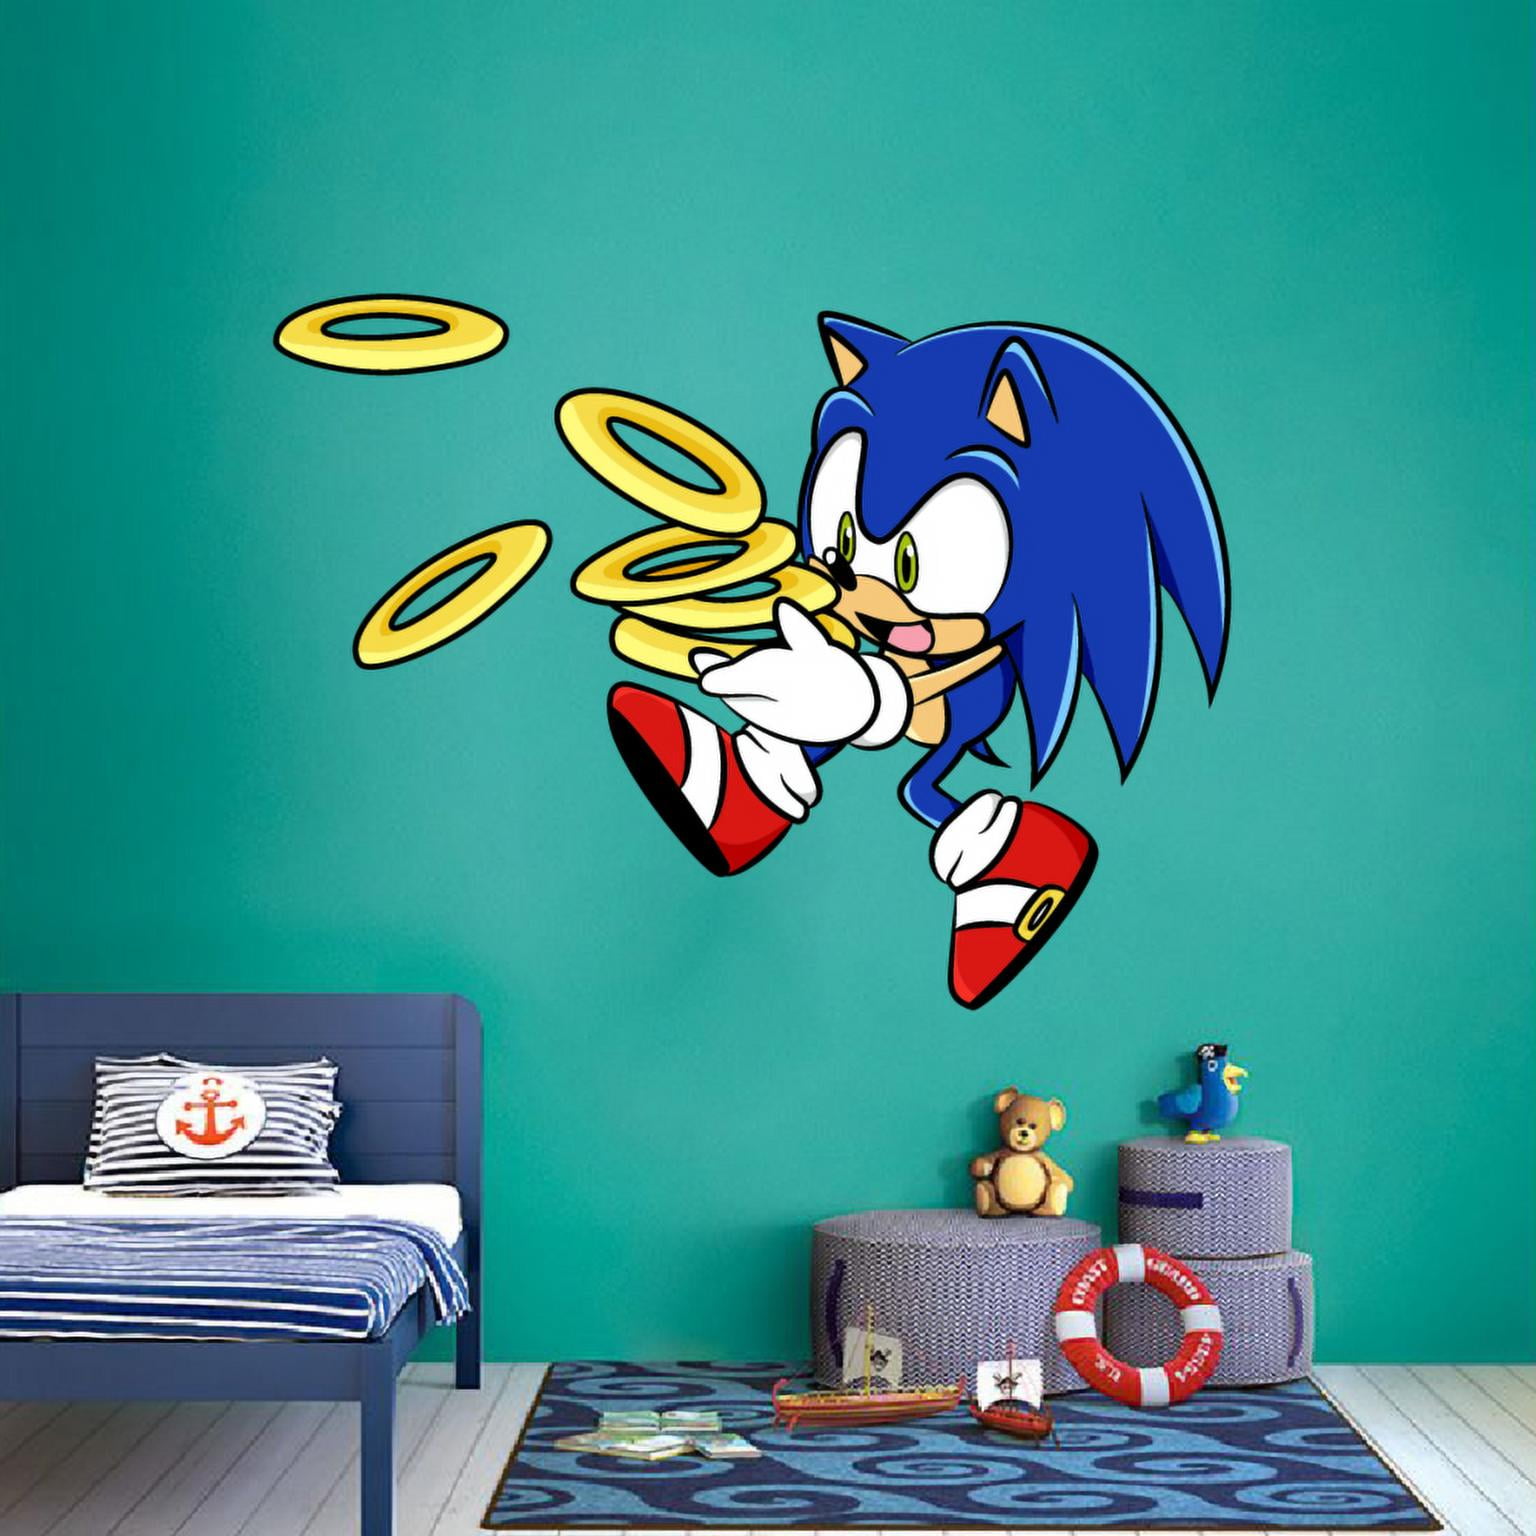 SUPER SONIC THE HEDGEHOG Wall Stickers, by Design With Vinyl 